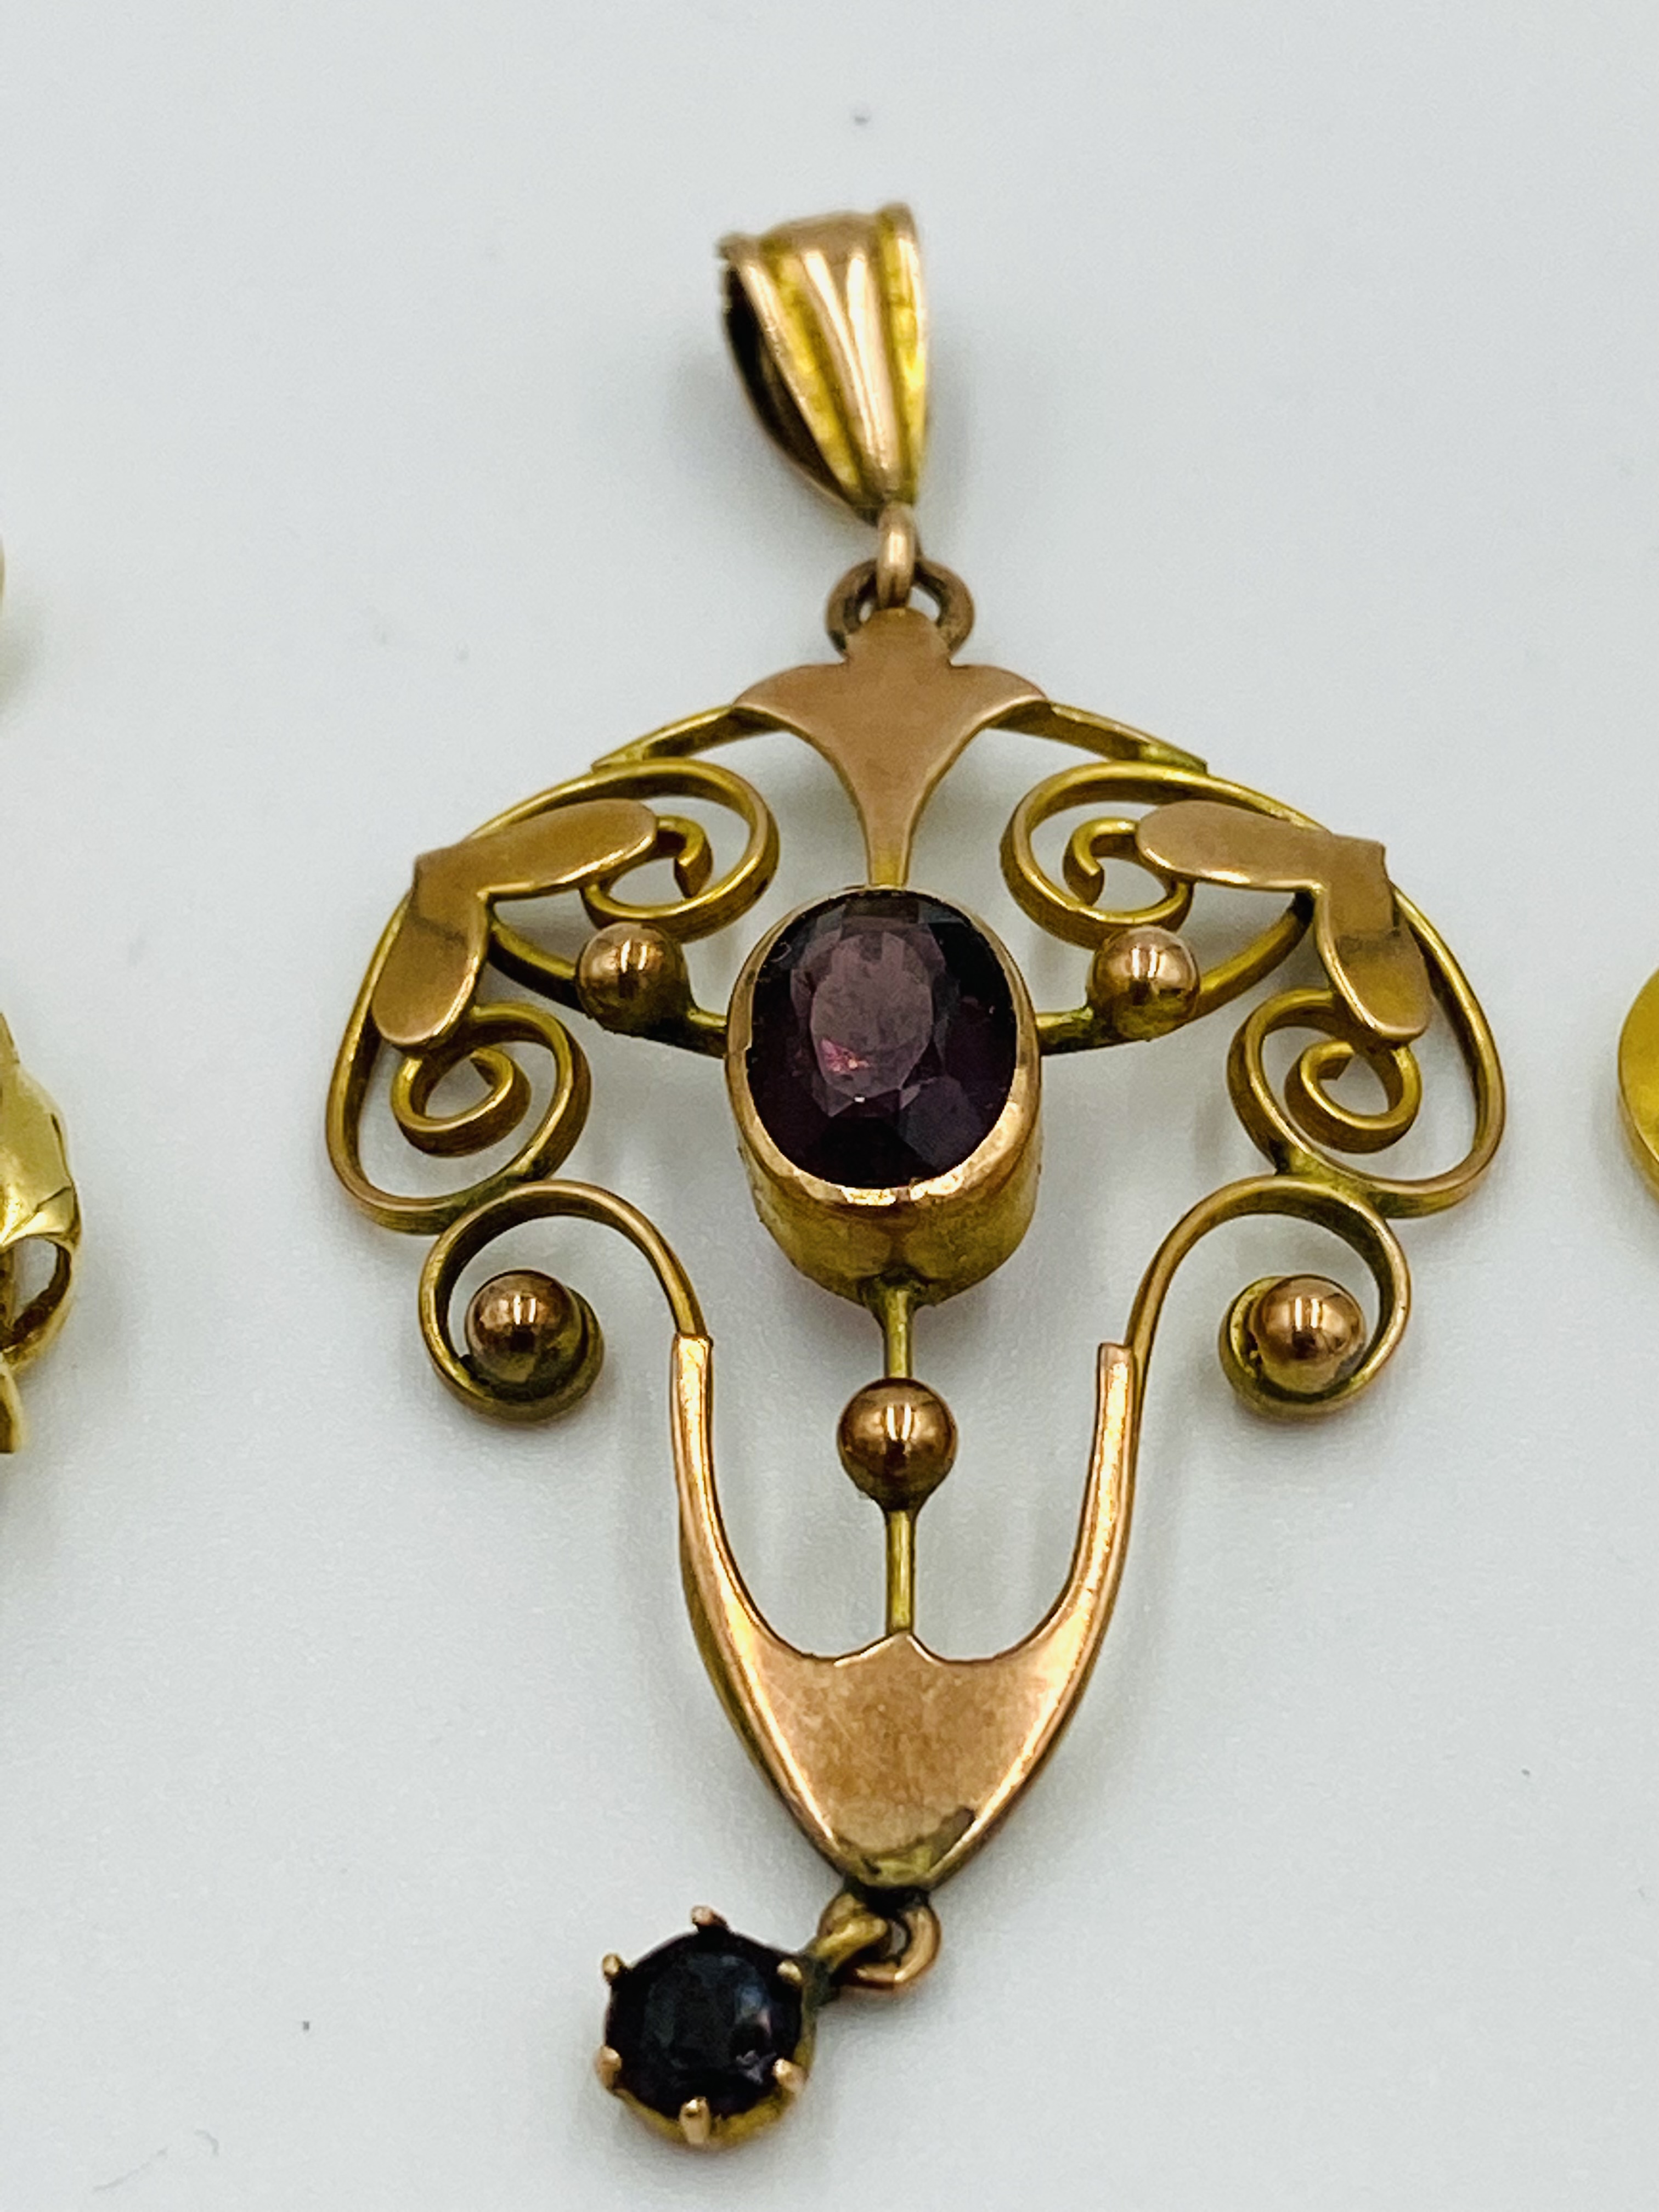 18ct gold and diamond pendant together with two 9ct gold pendants - Image 5 of 6